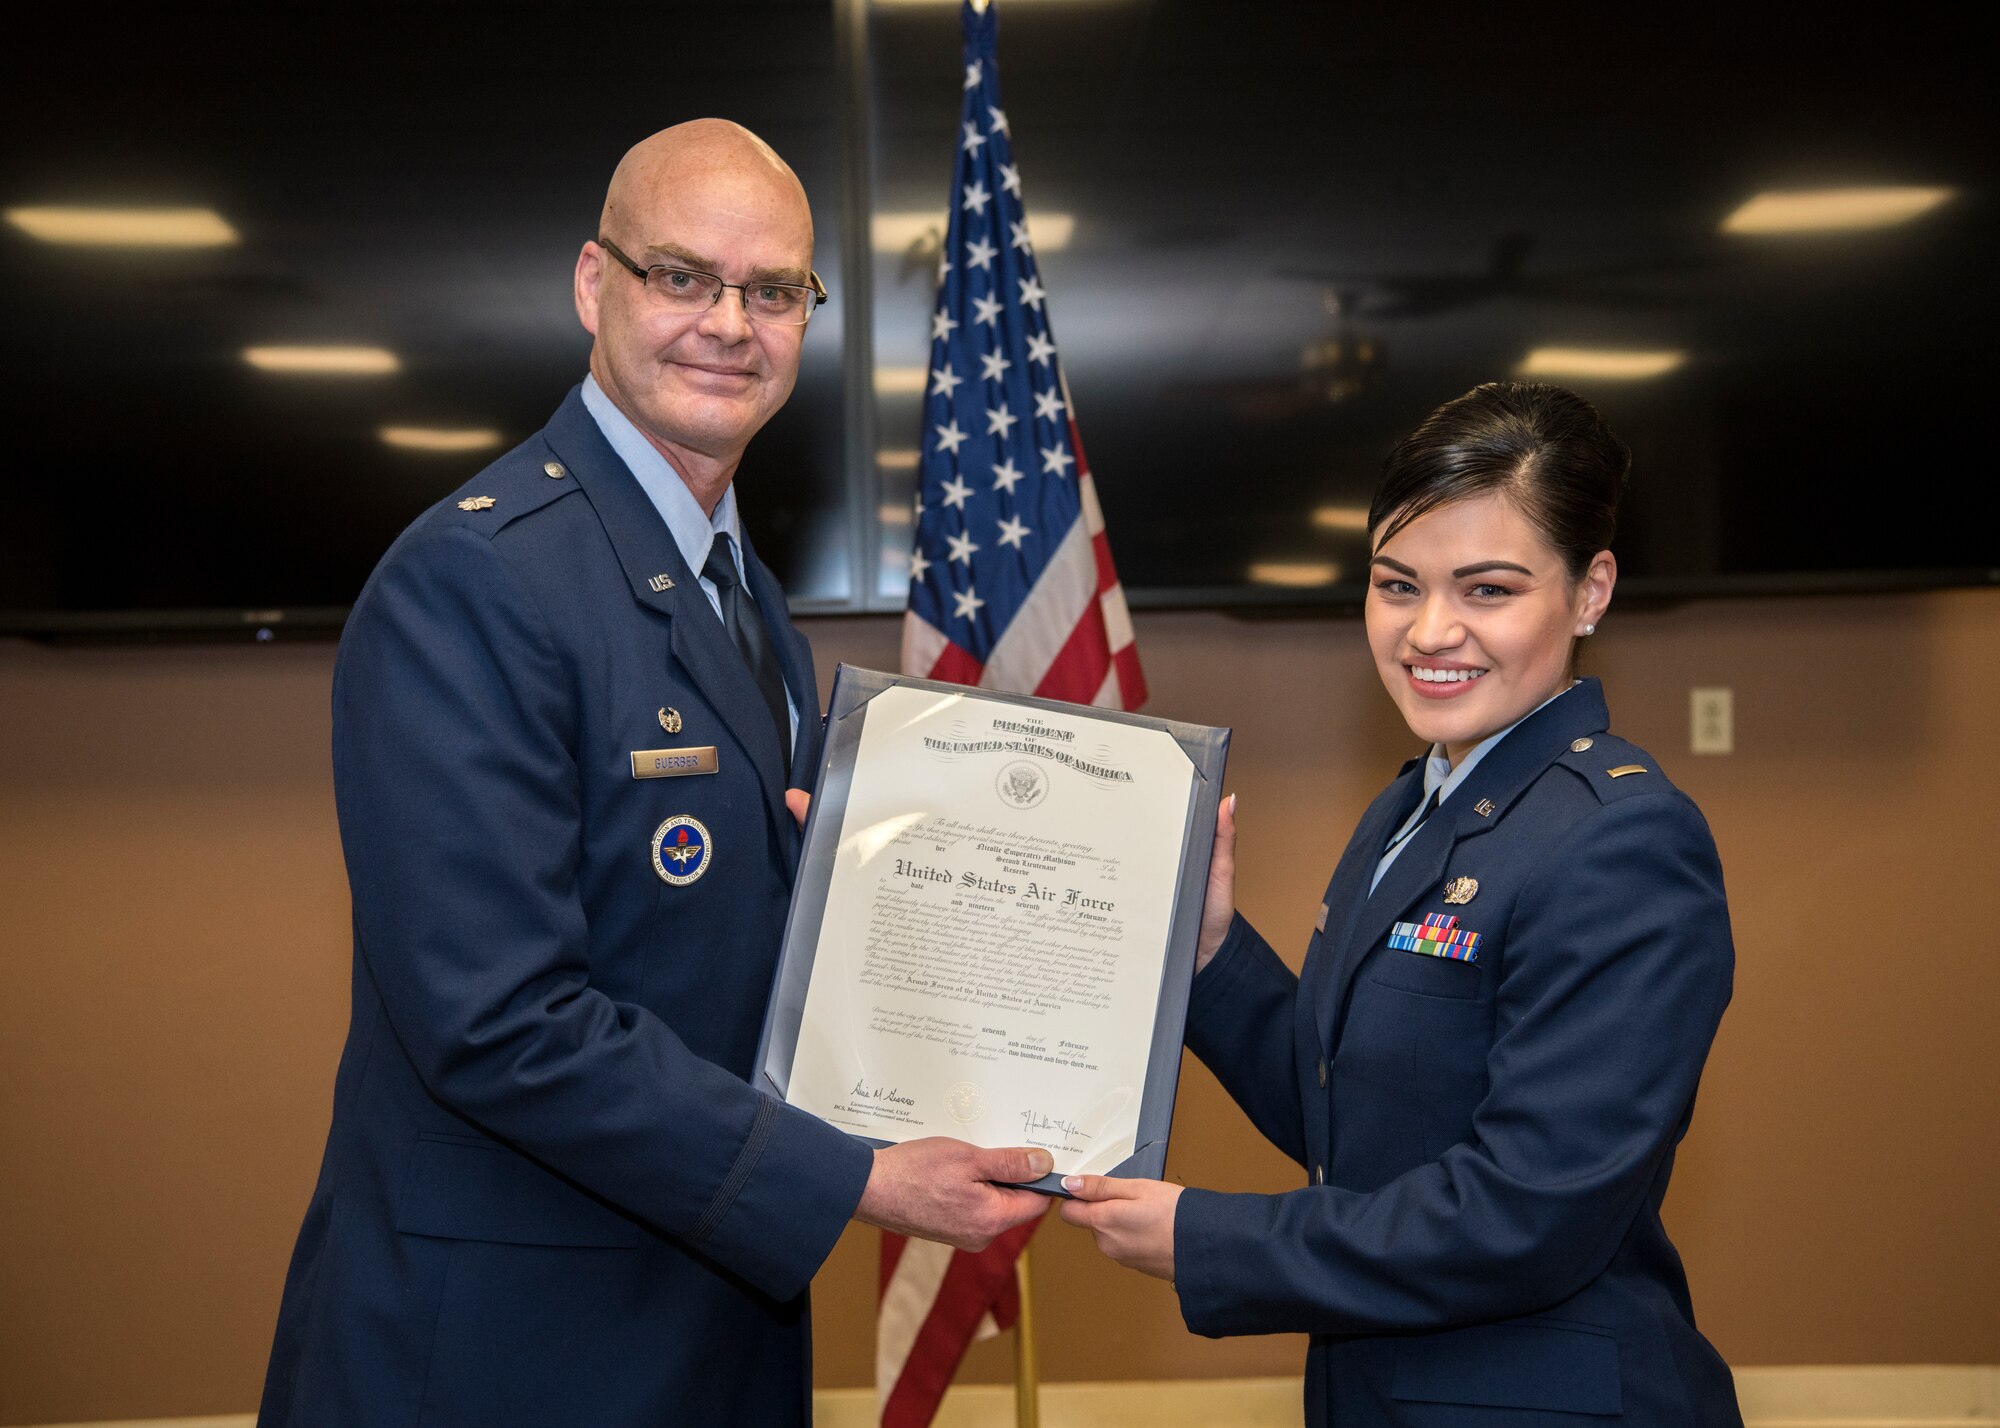 Lieutenant Colonel Mark Guerber, detachment commander for University of Massachusetts in Amherst Reserve Officer Training Corps Detachment 370, and 2nd Lt. Nicolle Mathison pose for a photo Feb. 7, 2018, at Barnes Air National Guard Base. Mathison will serve as a public affairs officer at Nellis Air Force Base. (U.S. Air National Guard photo by Airman 1st Class Randy Burlingame)